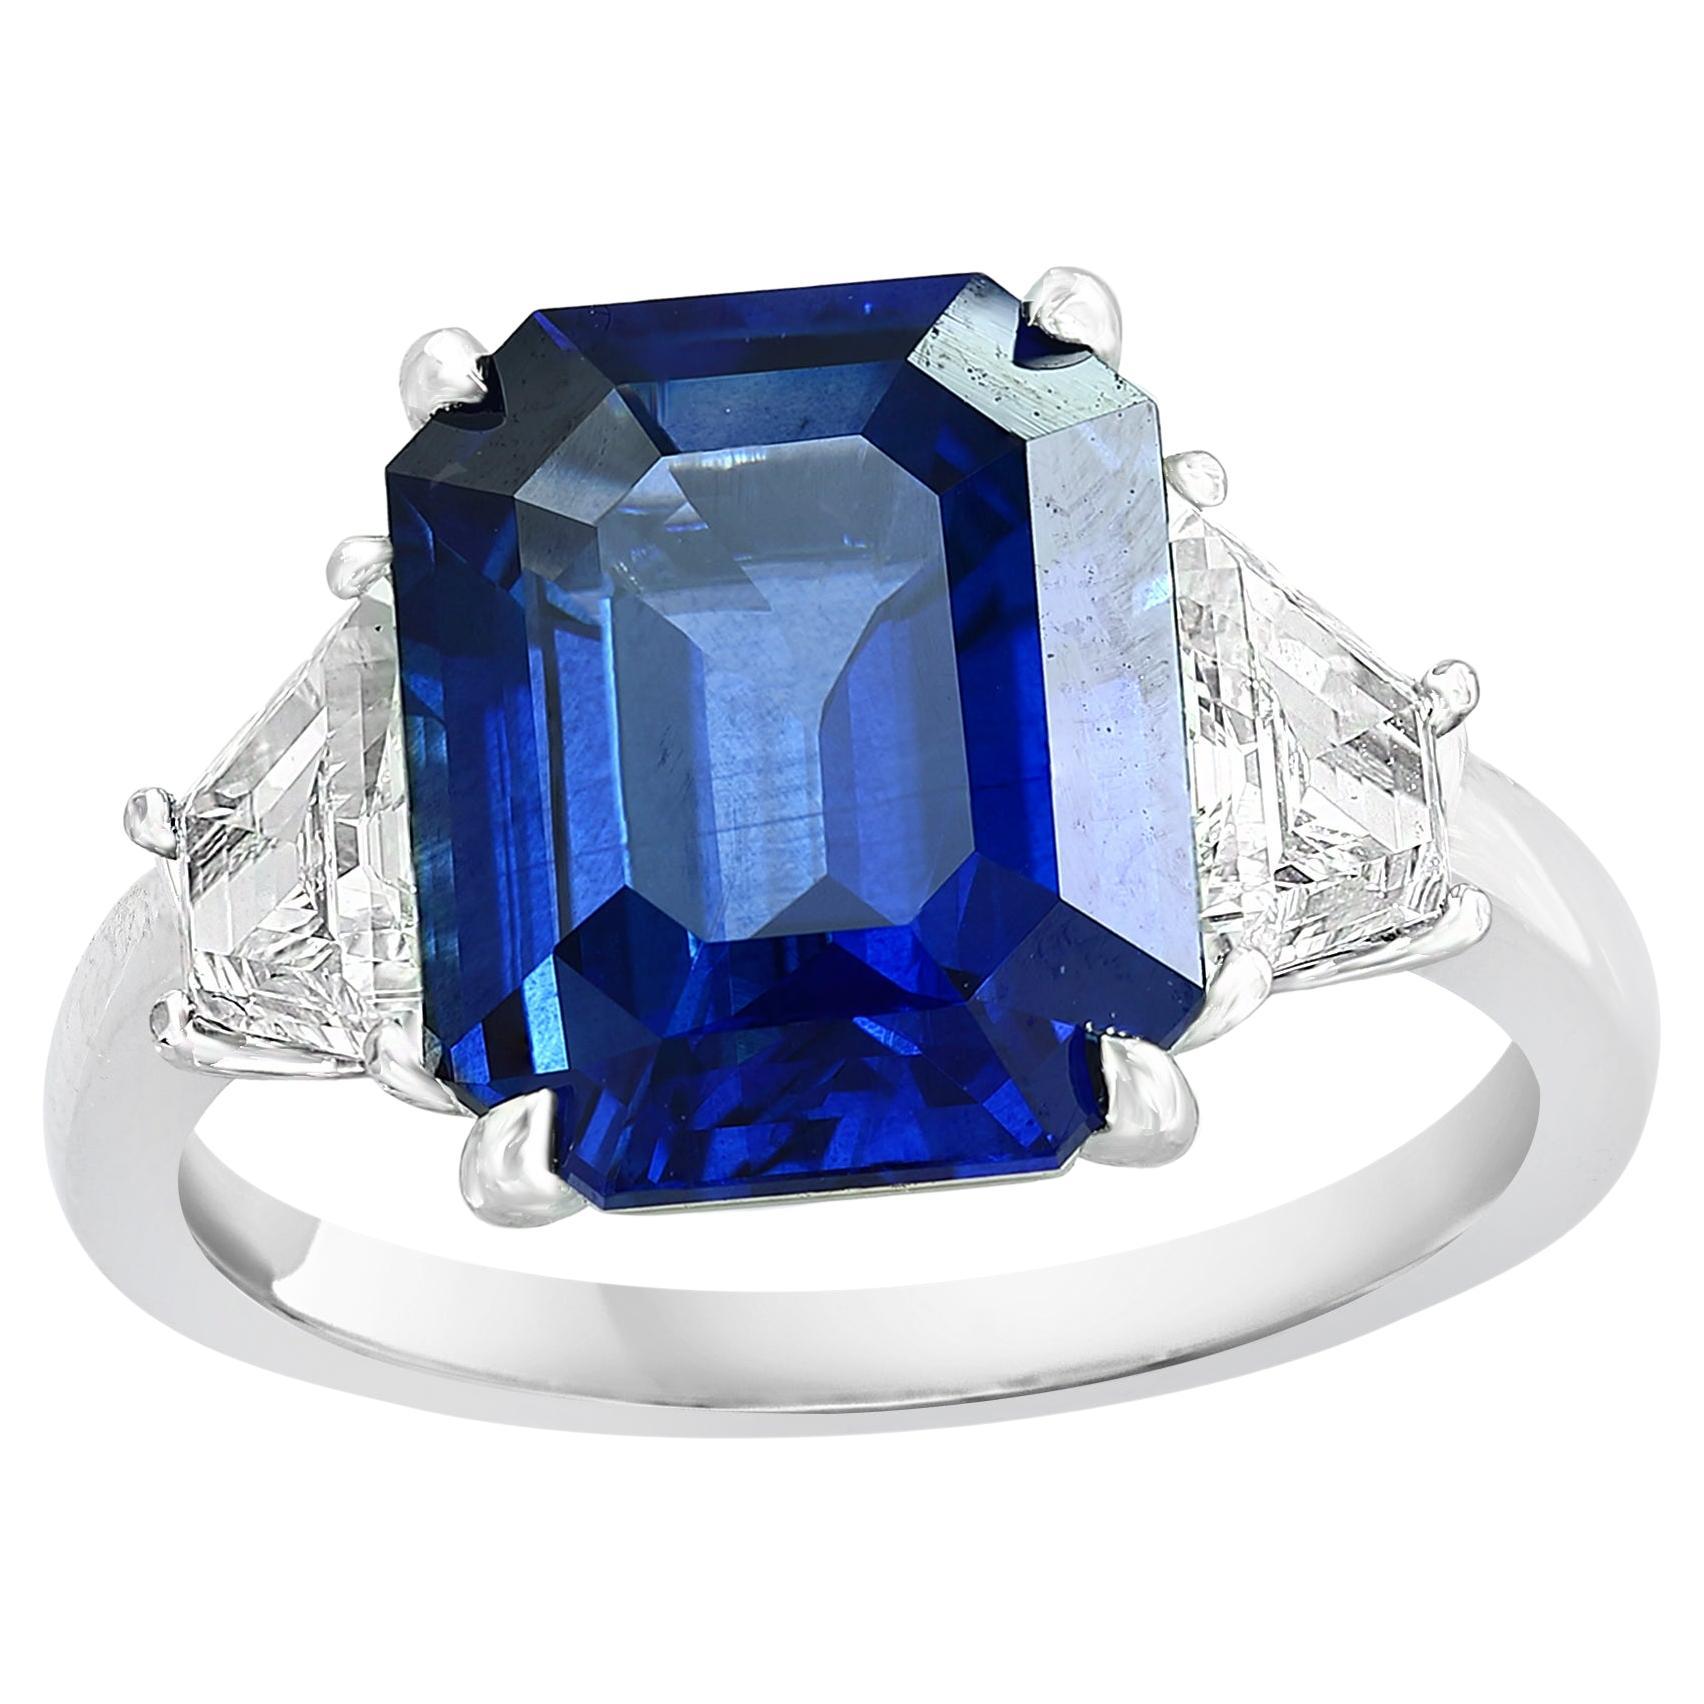 Certified 6.21 Carat Emerald Cut Sapphire & Diamond Engagement Ring in Platinum For Sale